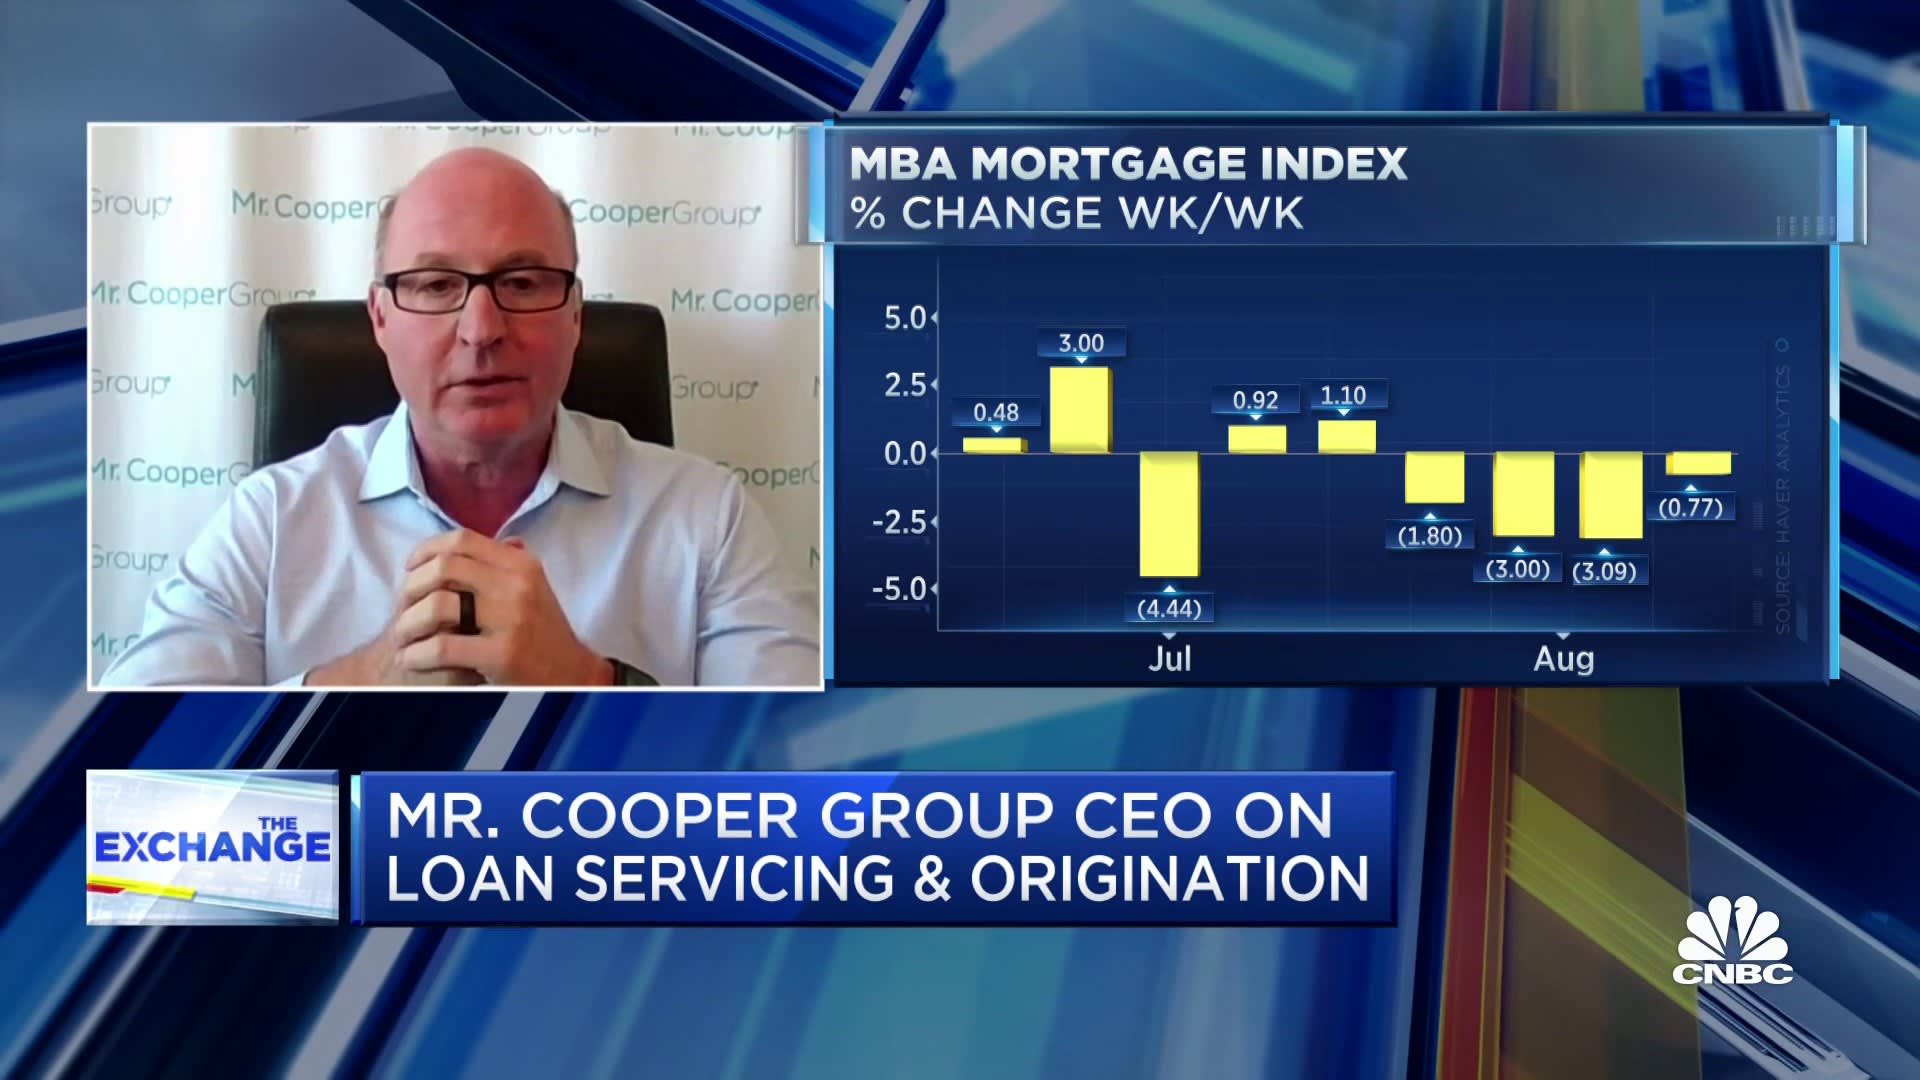 Mortgage servicing is thriving due to homeowners deciding not to sell, says Mr. Cooper Group CEO